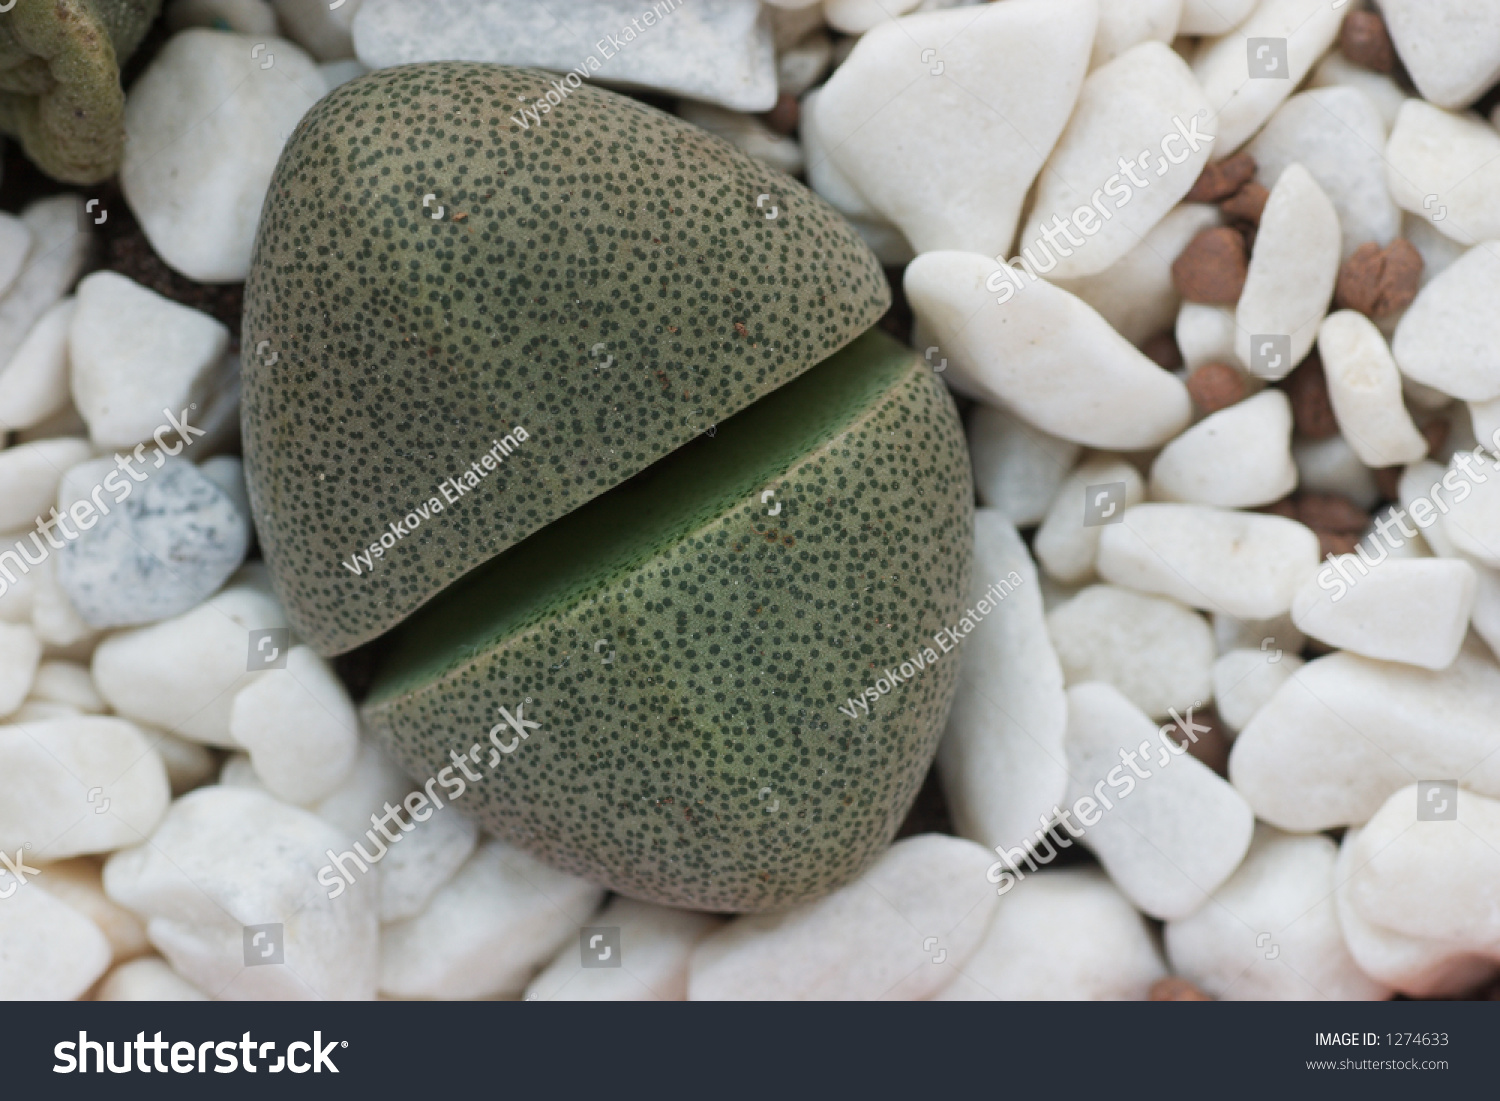 Green Dotted Thornless Cactus Stock Photo 1274633 - Shutterstock